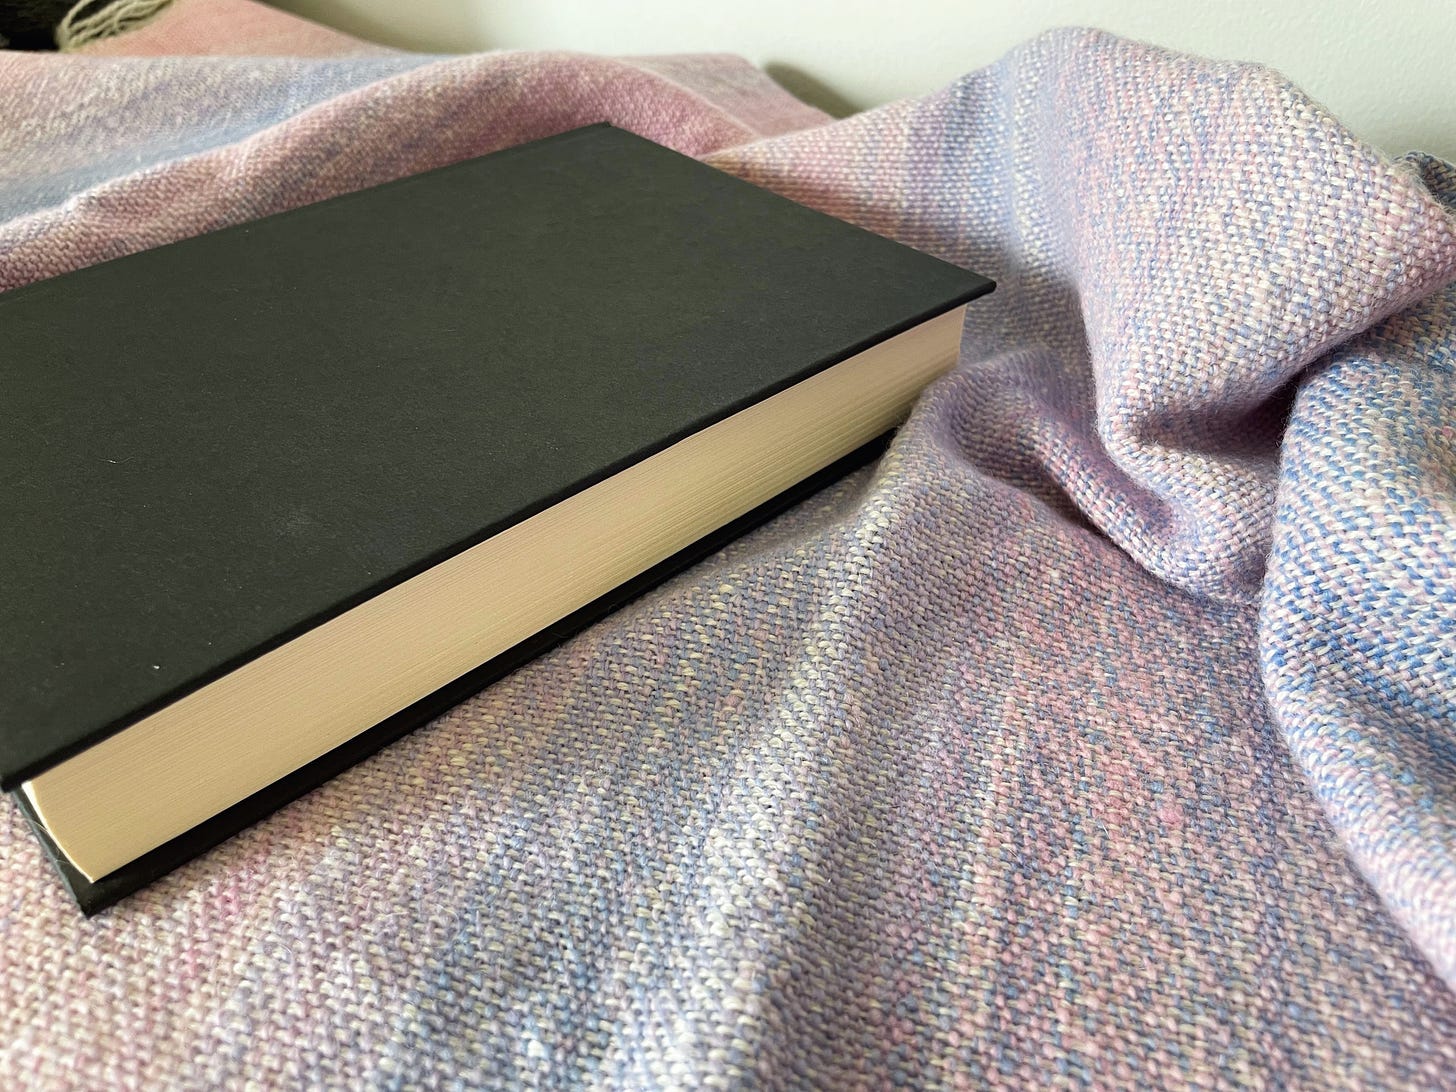 A book on a pastel woven cloth